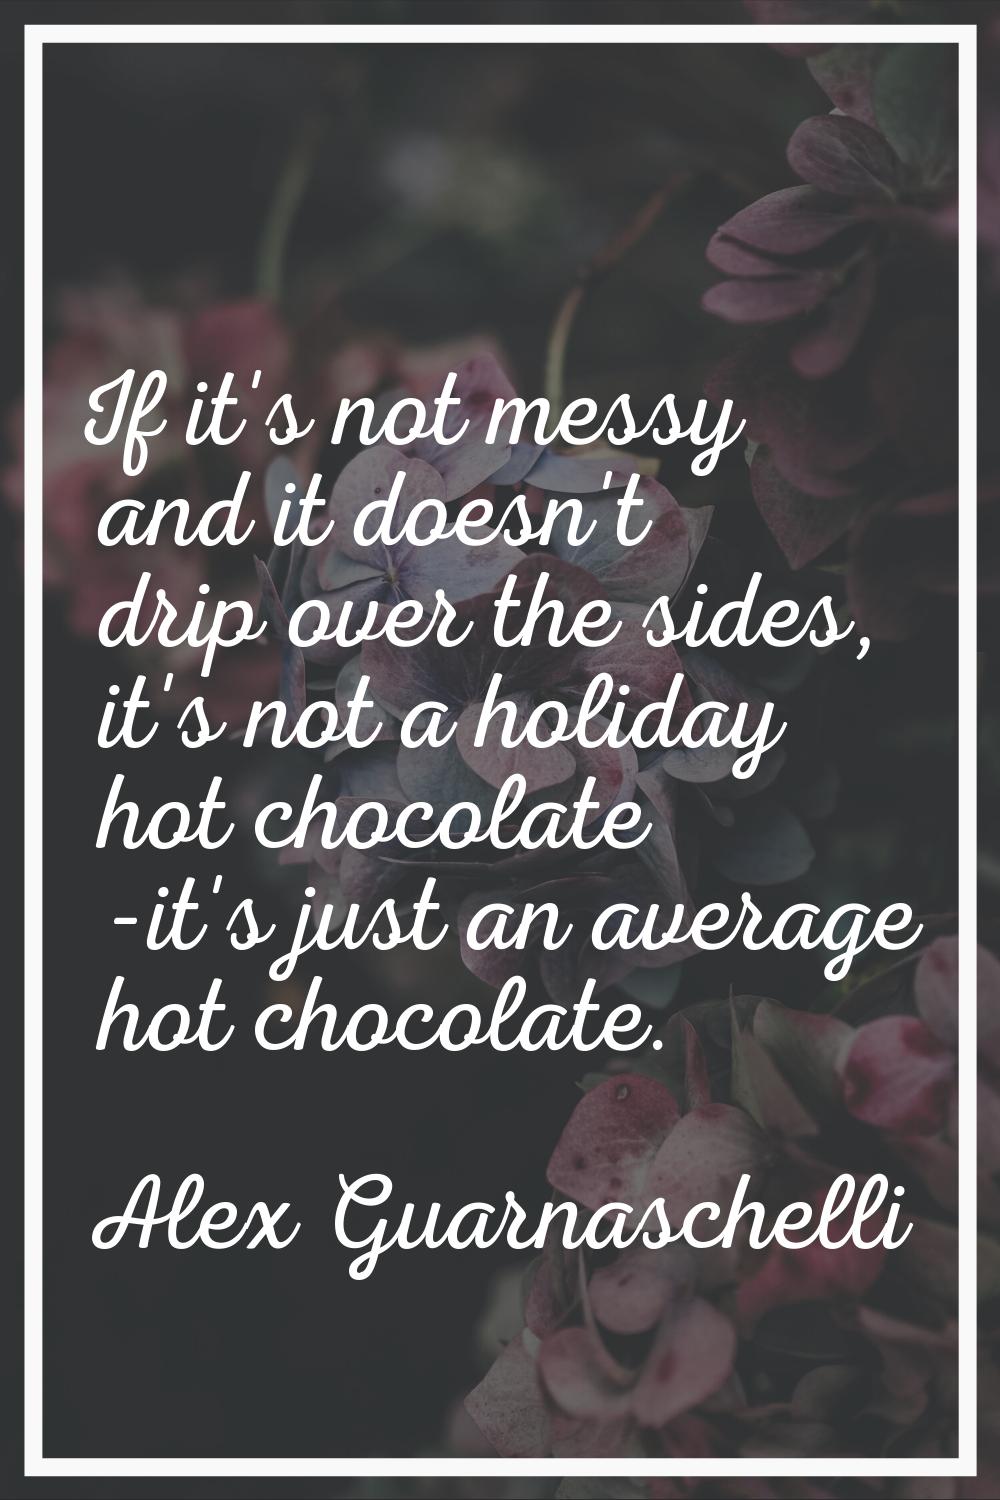 If it's not messy and it doesn't drip over the sides, it's not a holiday hot chocolate -it's just a